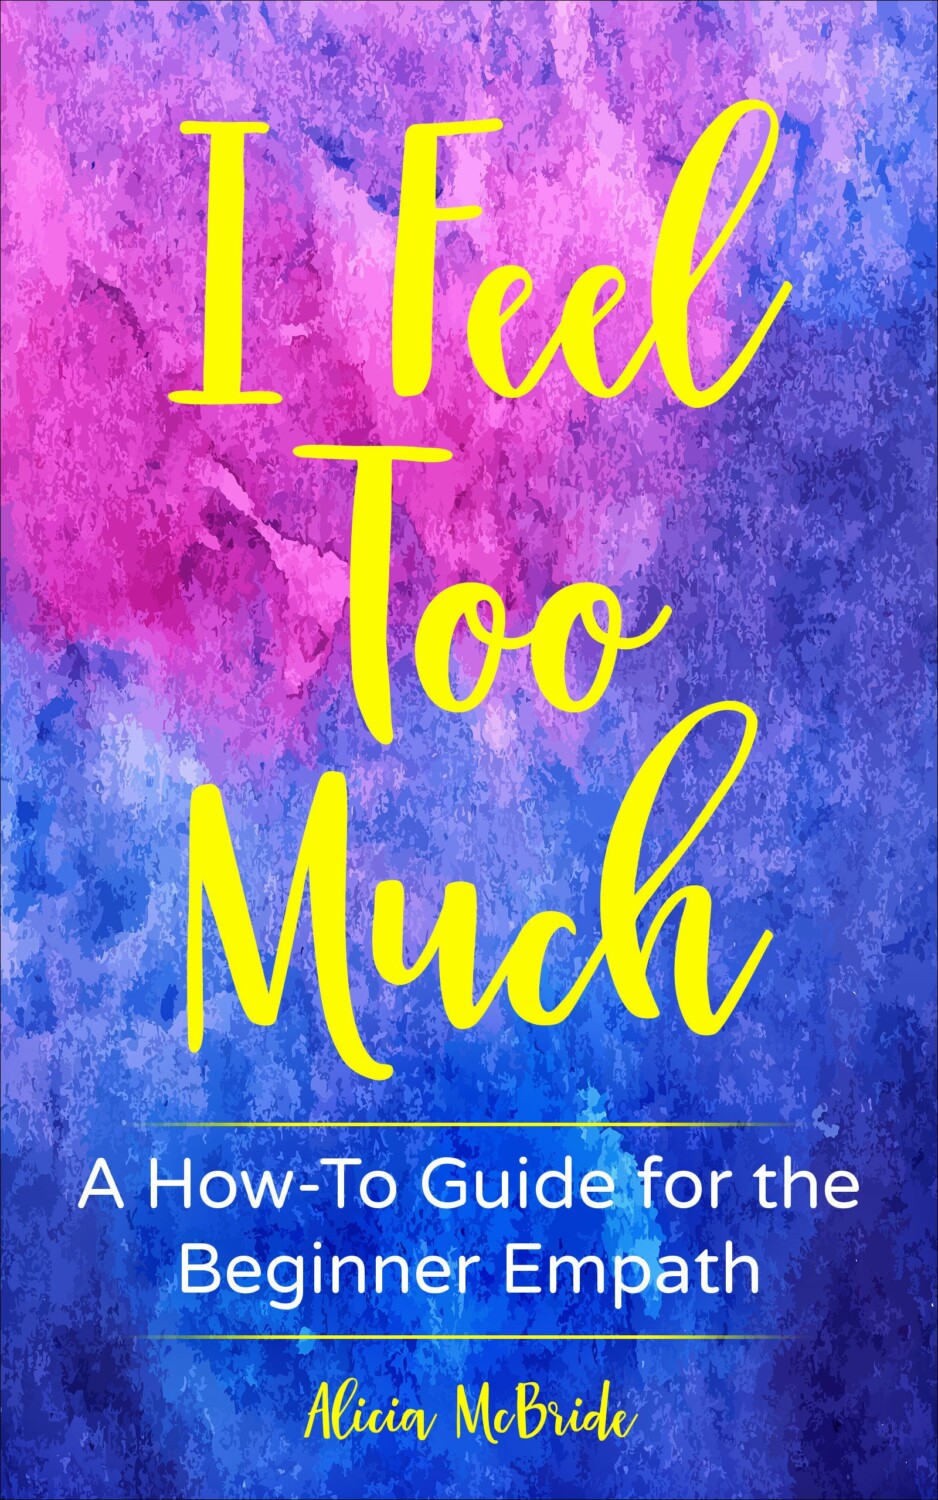 I Feel Too Much, by Alicia McBride